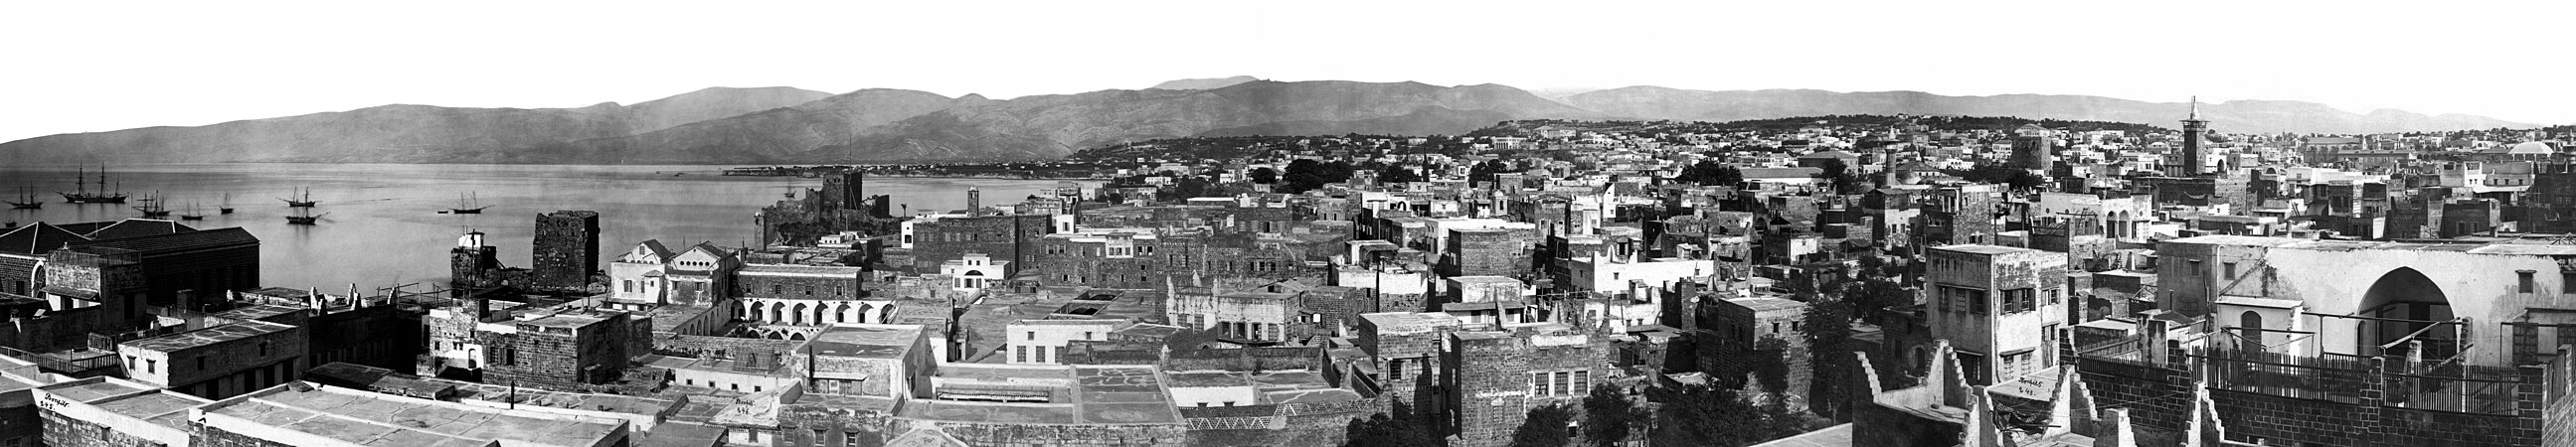 Historical panorama of Beirut, by Maison Bonfils (edited by Banzoo)